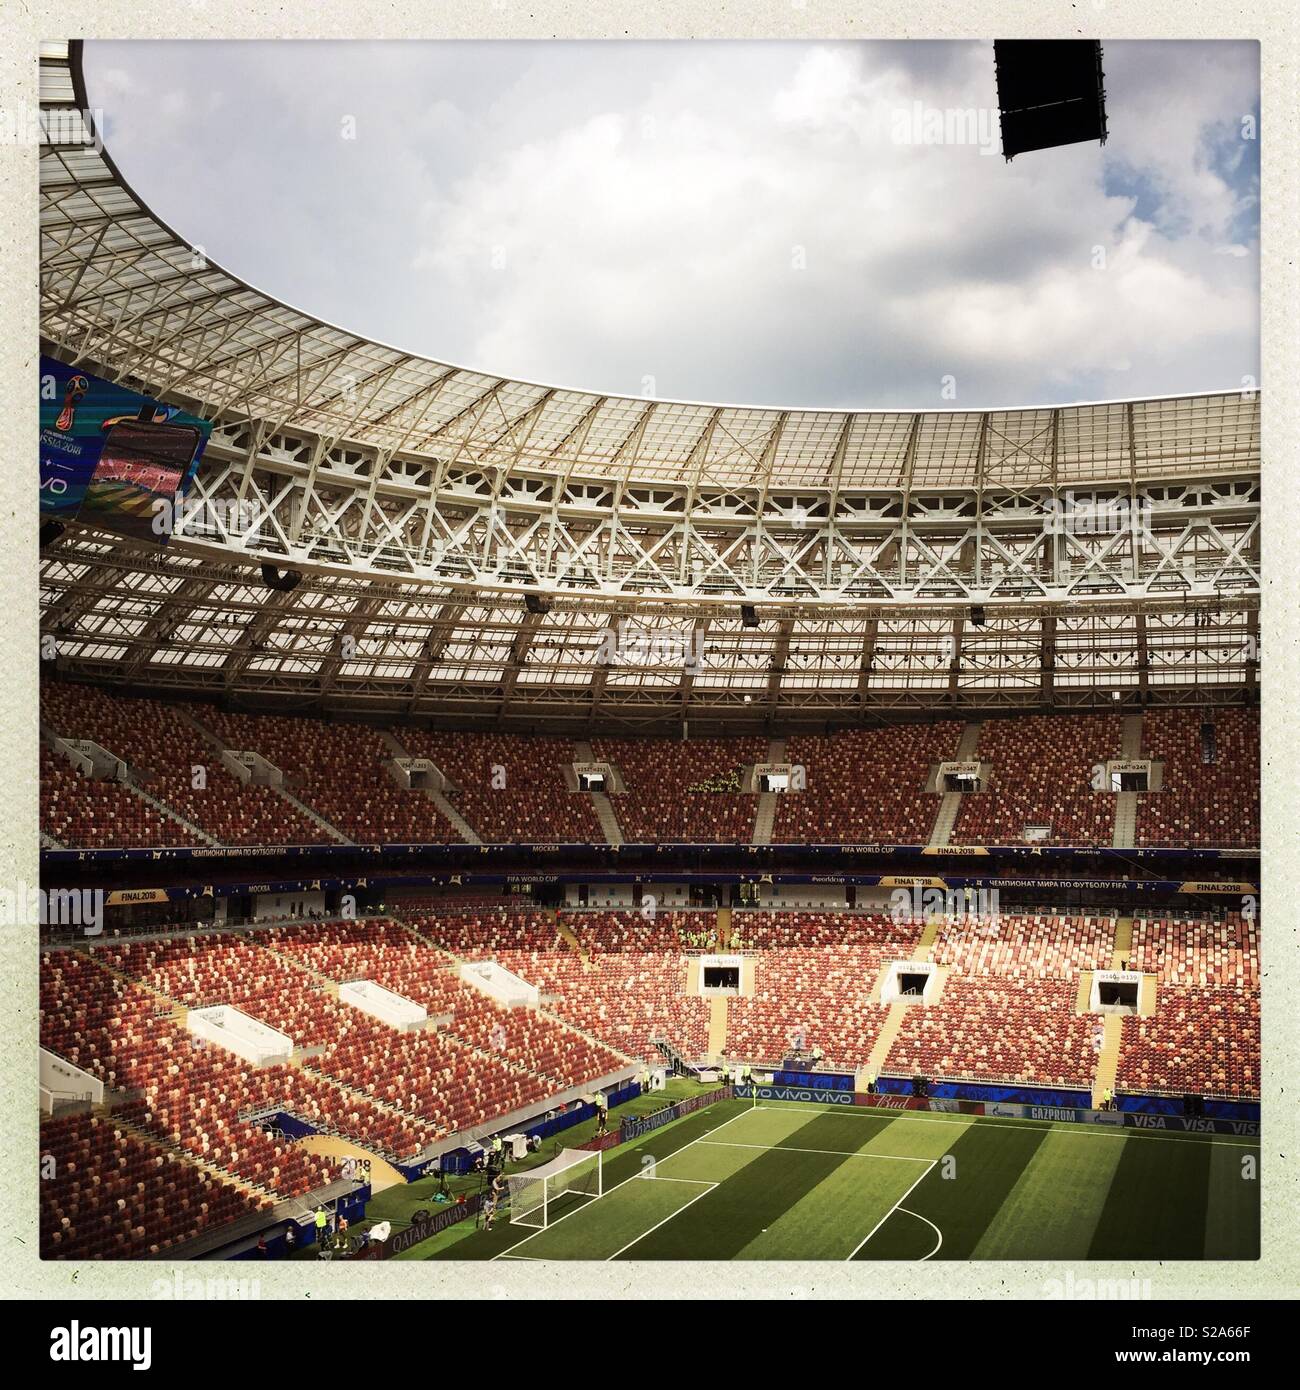 The Luzhniki Stadium is the national stadium of Russia, located in its capital city, Moscow. Stock Photo